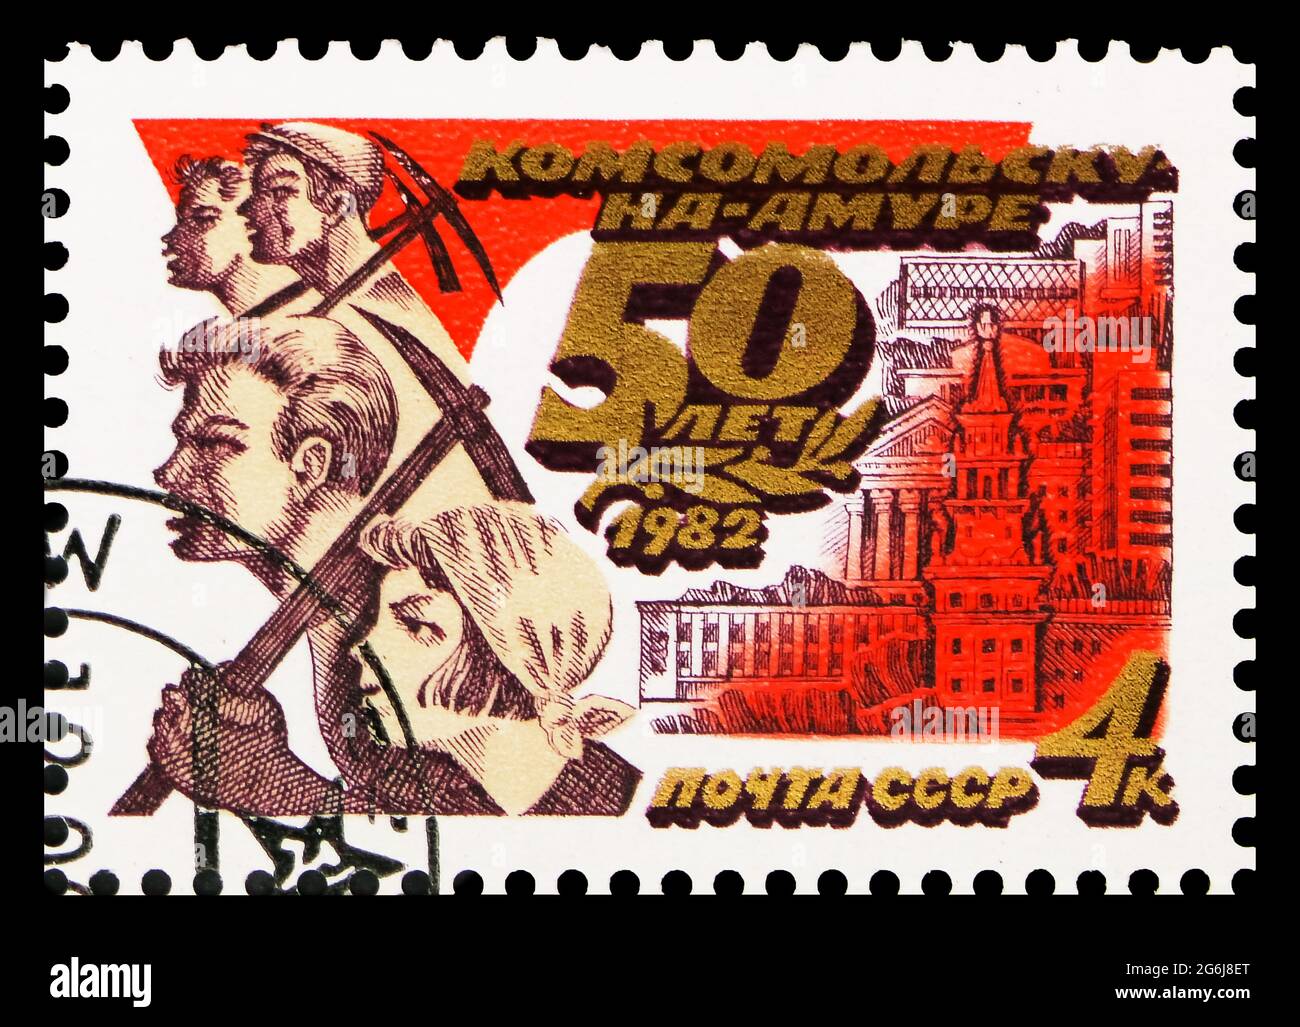 MOSCOW, RUSSIA - MARCH 21, 2020: Postage stamp printed in Soviet Union devoted to 50th Anniversary of Komsomolsk-on-Amur, serie, circa 1982 Stock Photo